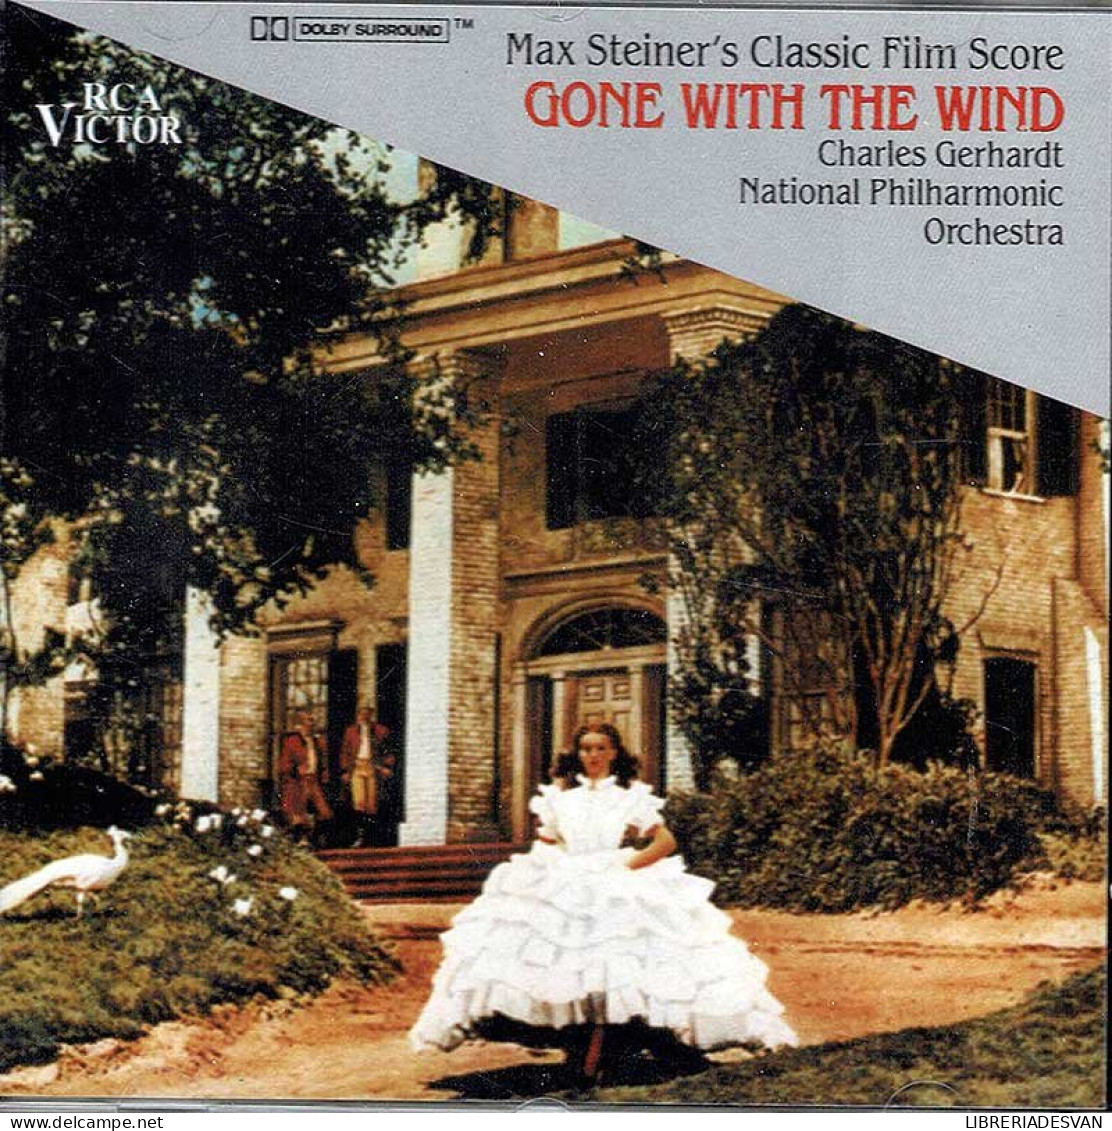 Max Steiner's Classic Film Score - Gone With The Wind. CD - Soundtracks, Film Music